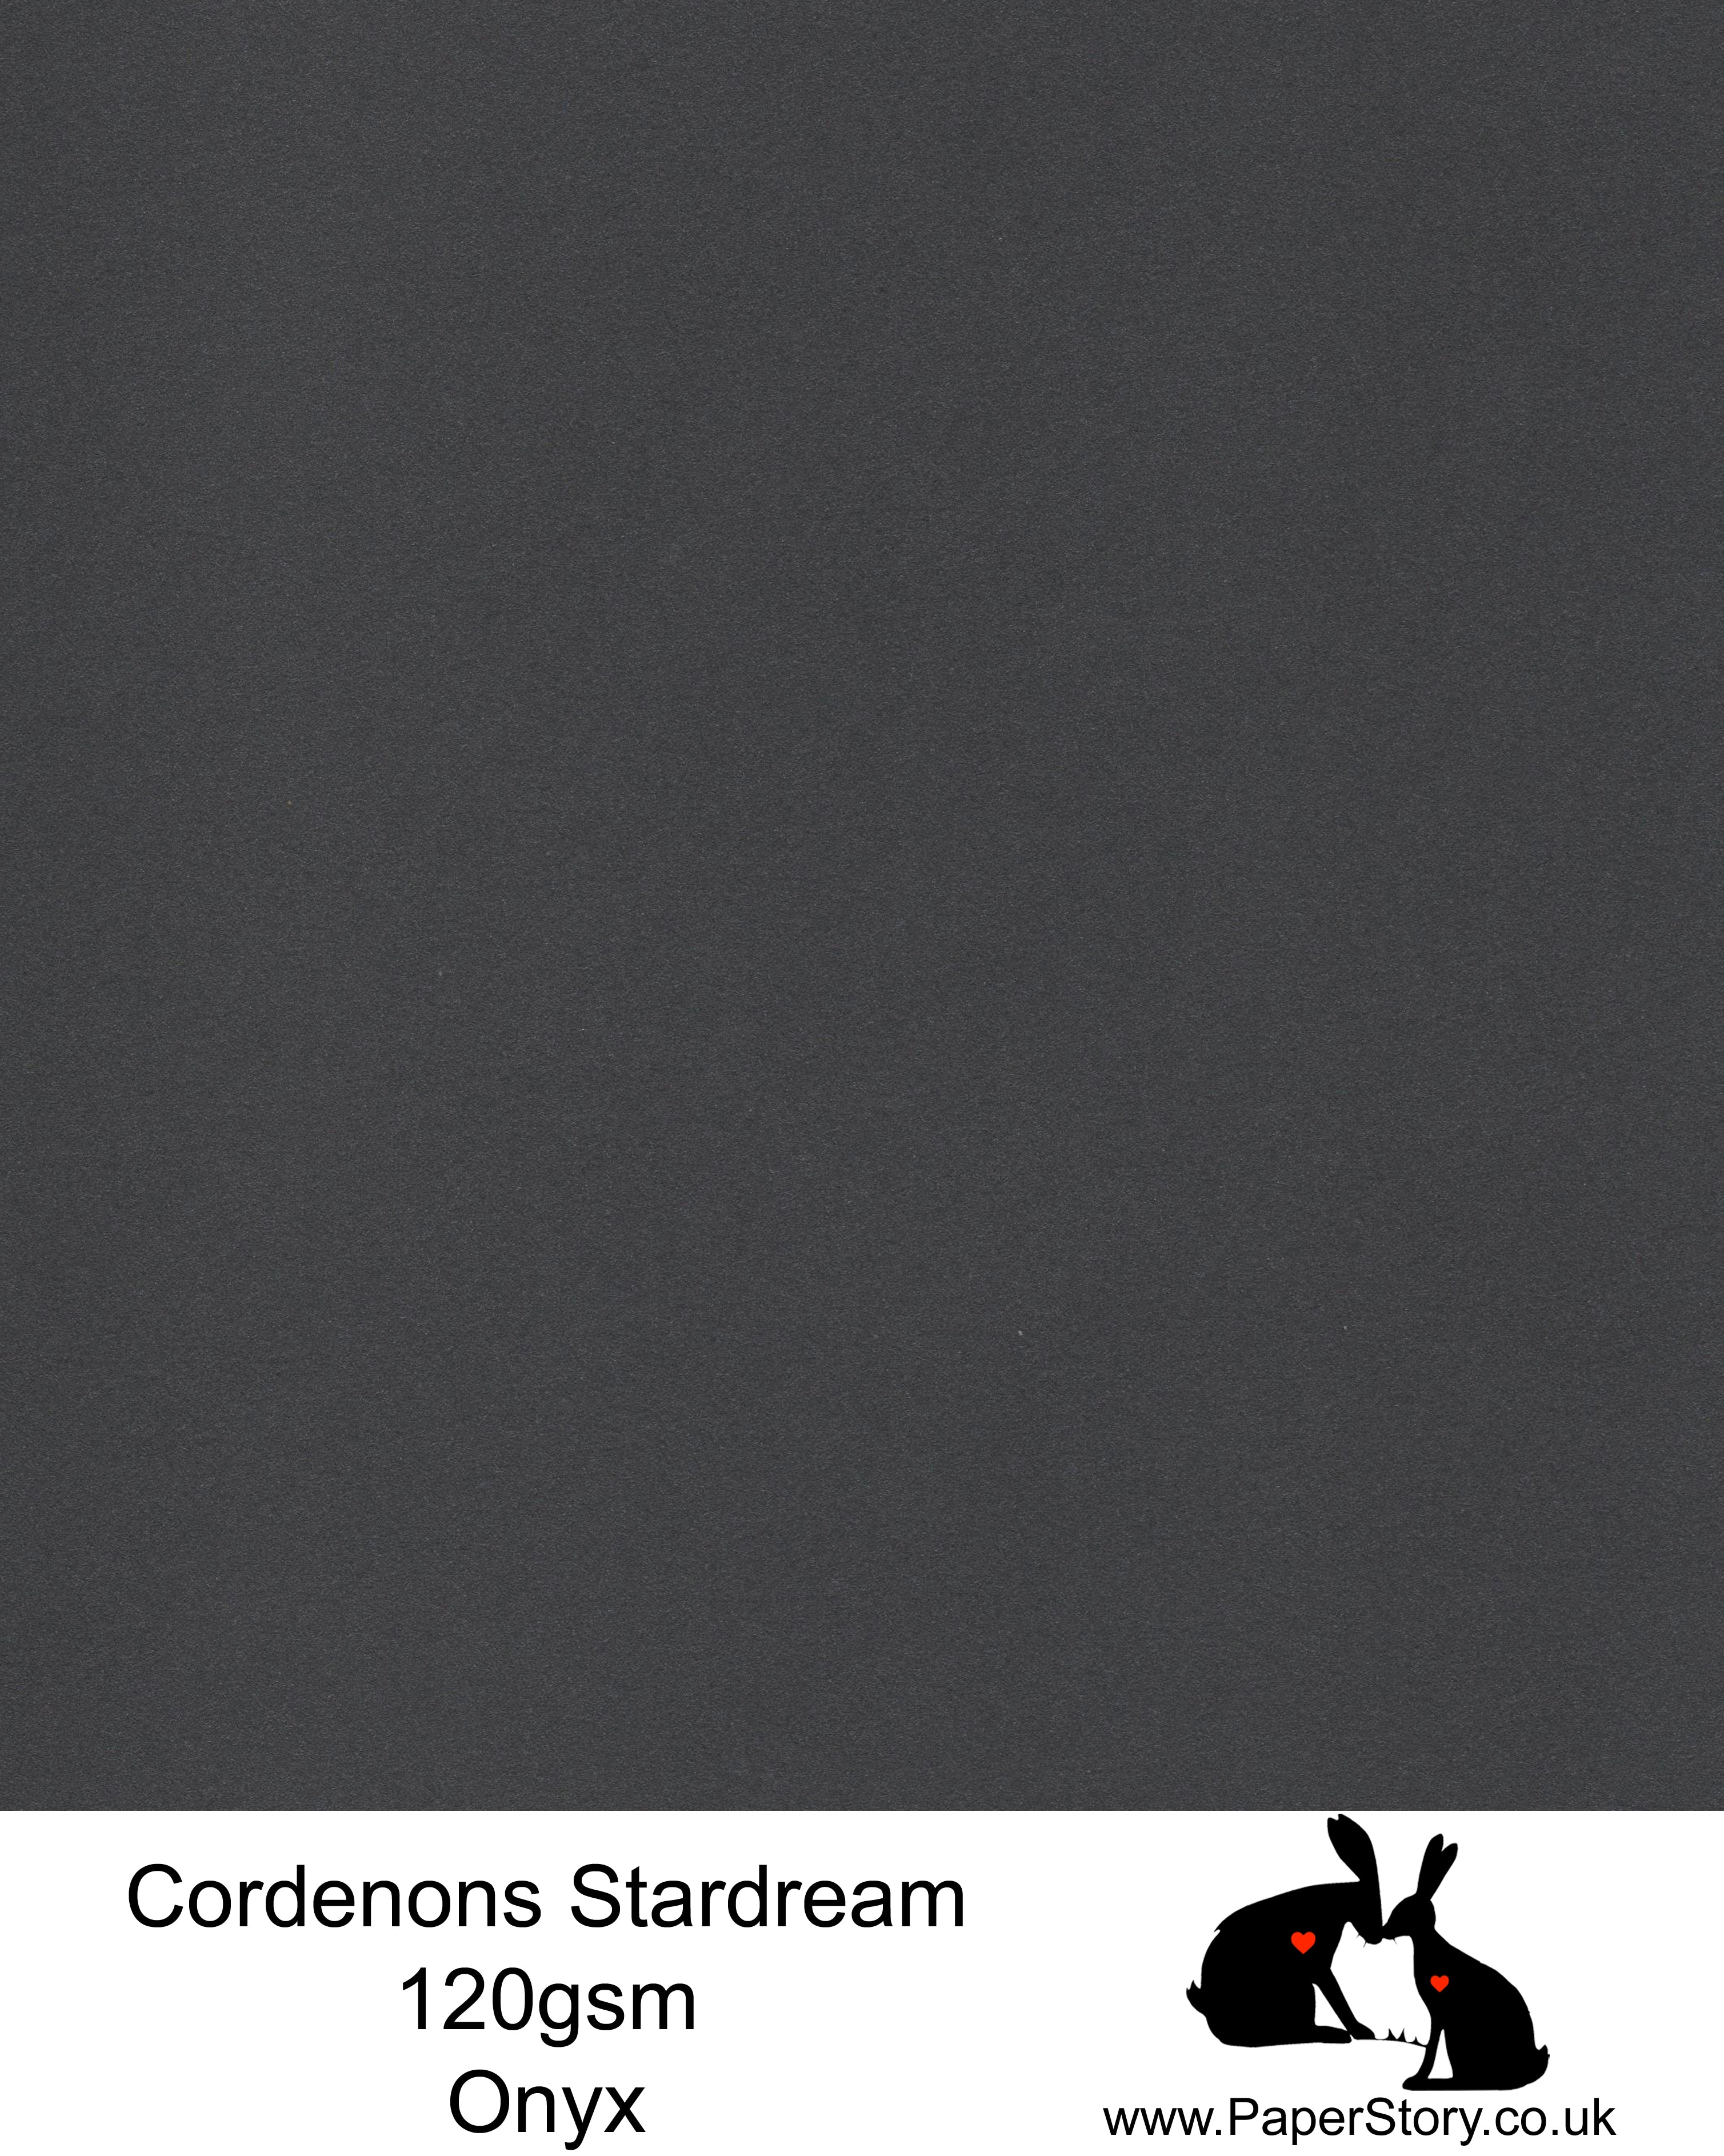 A4 Stardream 120gsm paper for Papercutting, craft, flower making  and wedding stationery. Black Onyx a popular papercutting paper, can be printed on and used in our layer packs. Stardream is a luxury Italian paper from Italy, it is a double sided quality Pearlescent paper with a matching colour core. FSC Certified, acid free, archival and PH Neutral